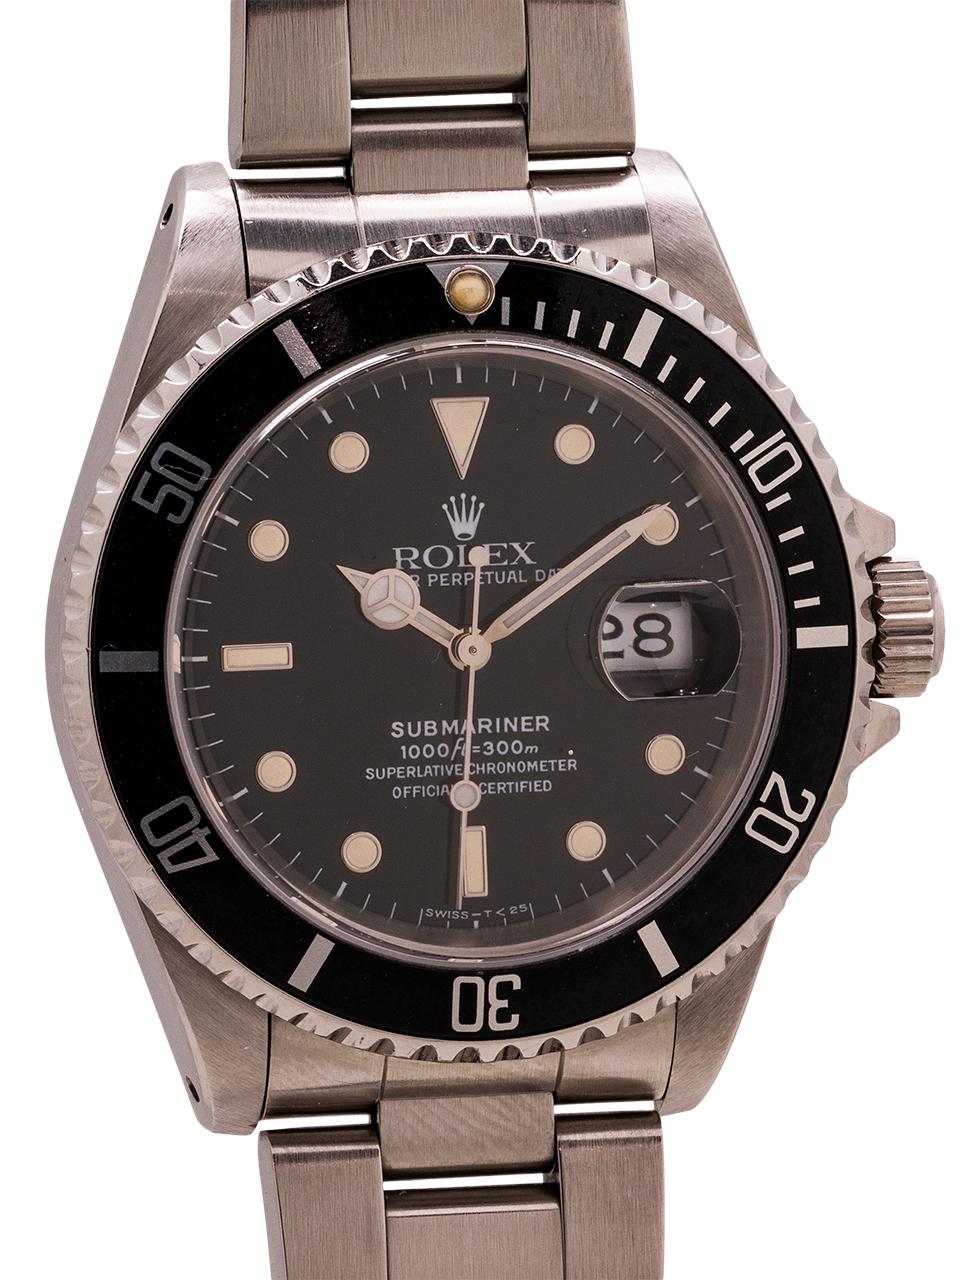 
A great looking circa 1990 Rolex Submariner ref# 16610 with lightly patina’d luminous tritium indexes, matching patina’d tritium hands, and matching lightly patina’d pearl. Featuring a sapphire crystal, quick set caliber 3135 movement,